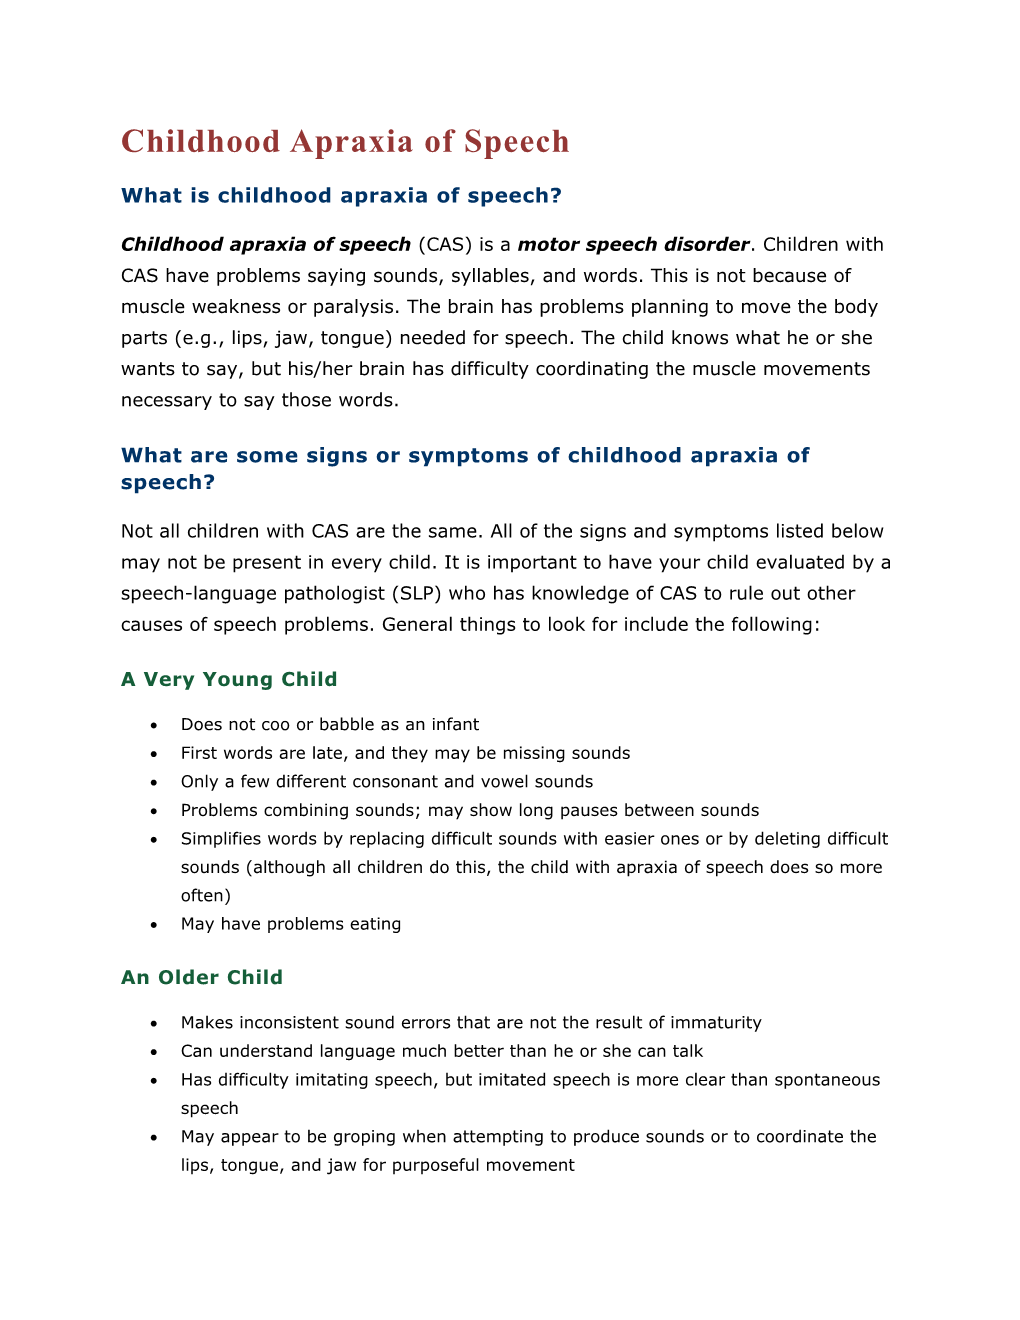 What Is Childhood Apraxia of Speech?